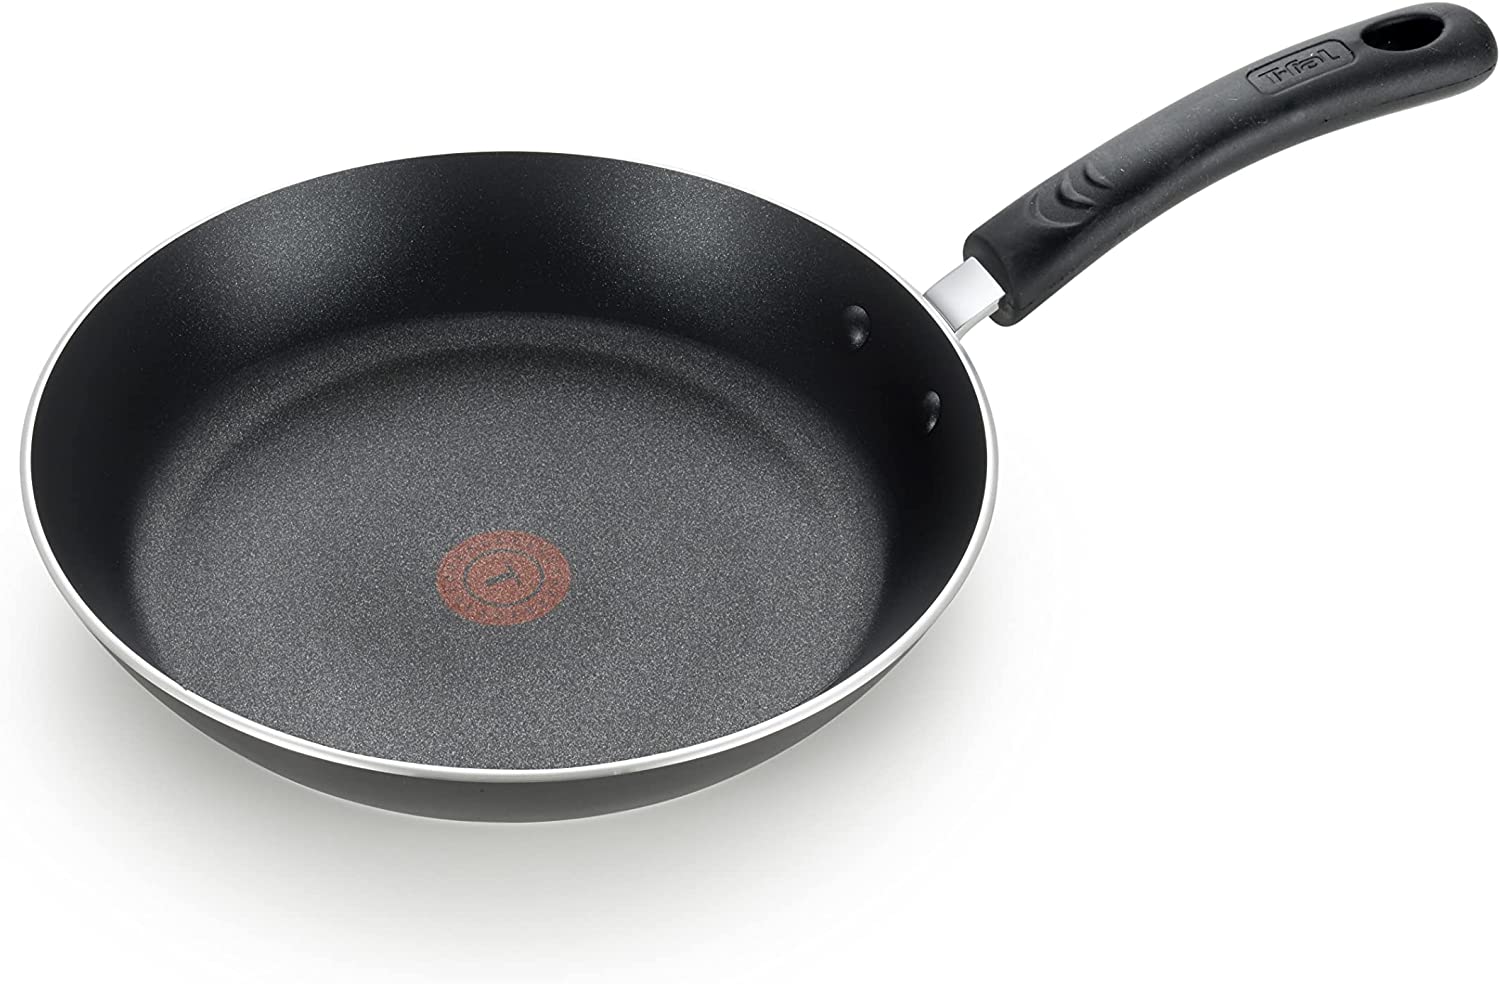 T-fal Silicone Handles Fry Pan, 12-Inch